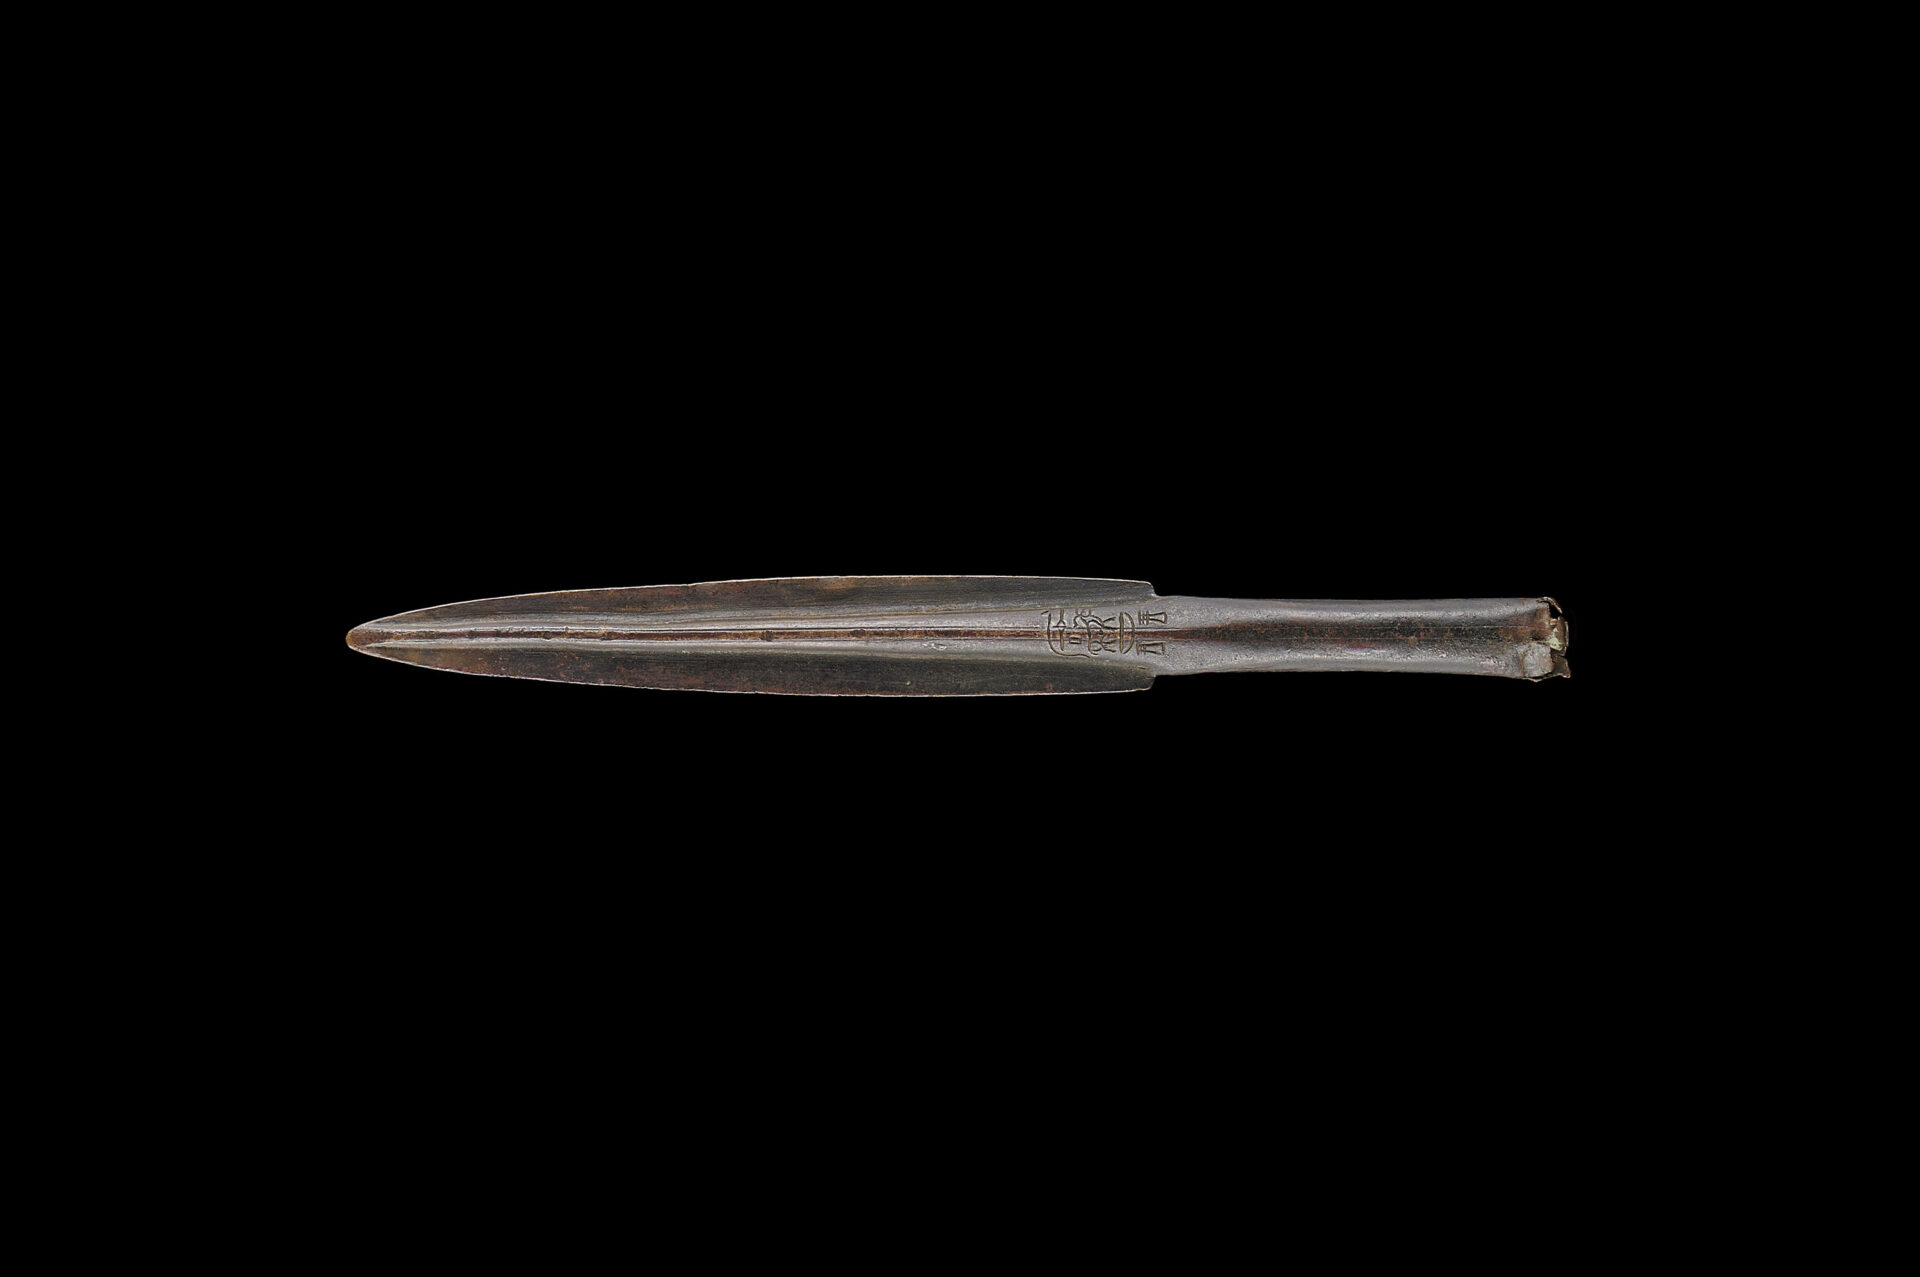 ANCIENT EGYPTIAN BRONZE SPEAR HEAD, INSCRIBED WITH HIEROGLYPHS, 992-990 B.C.